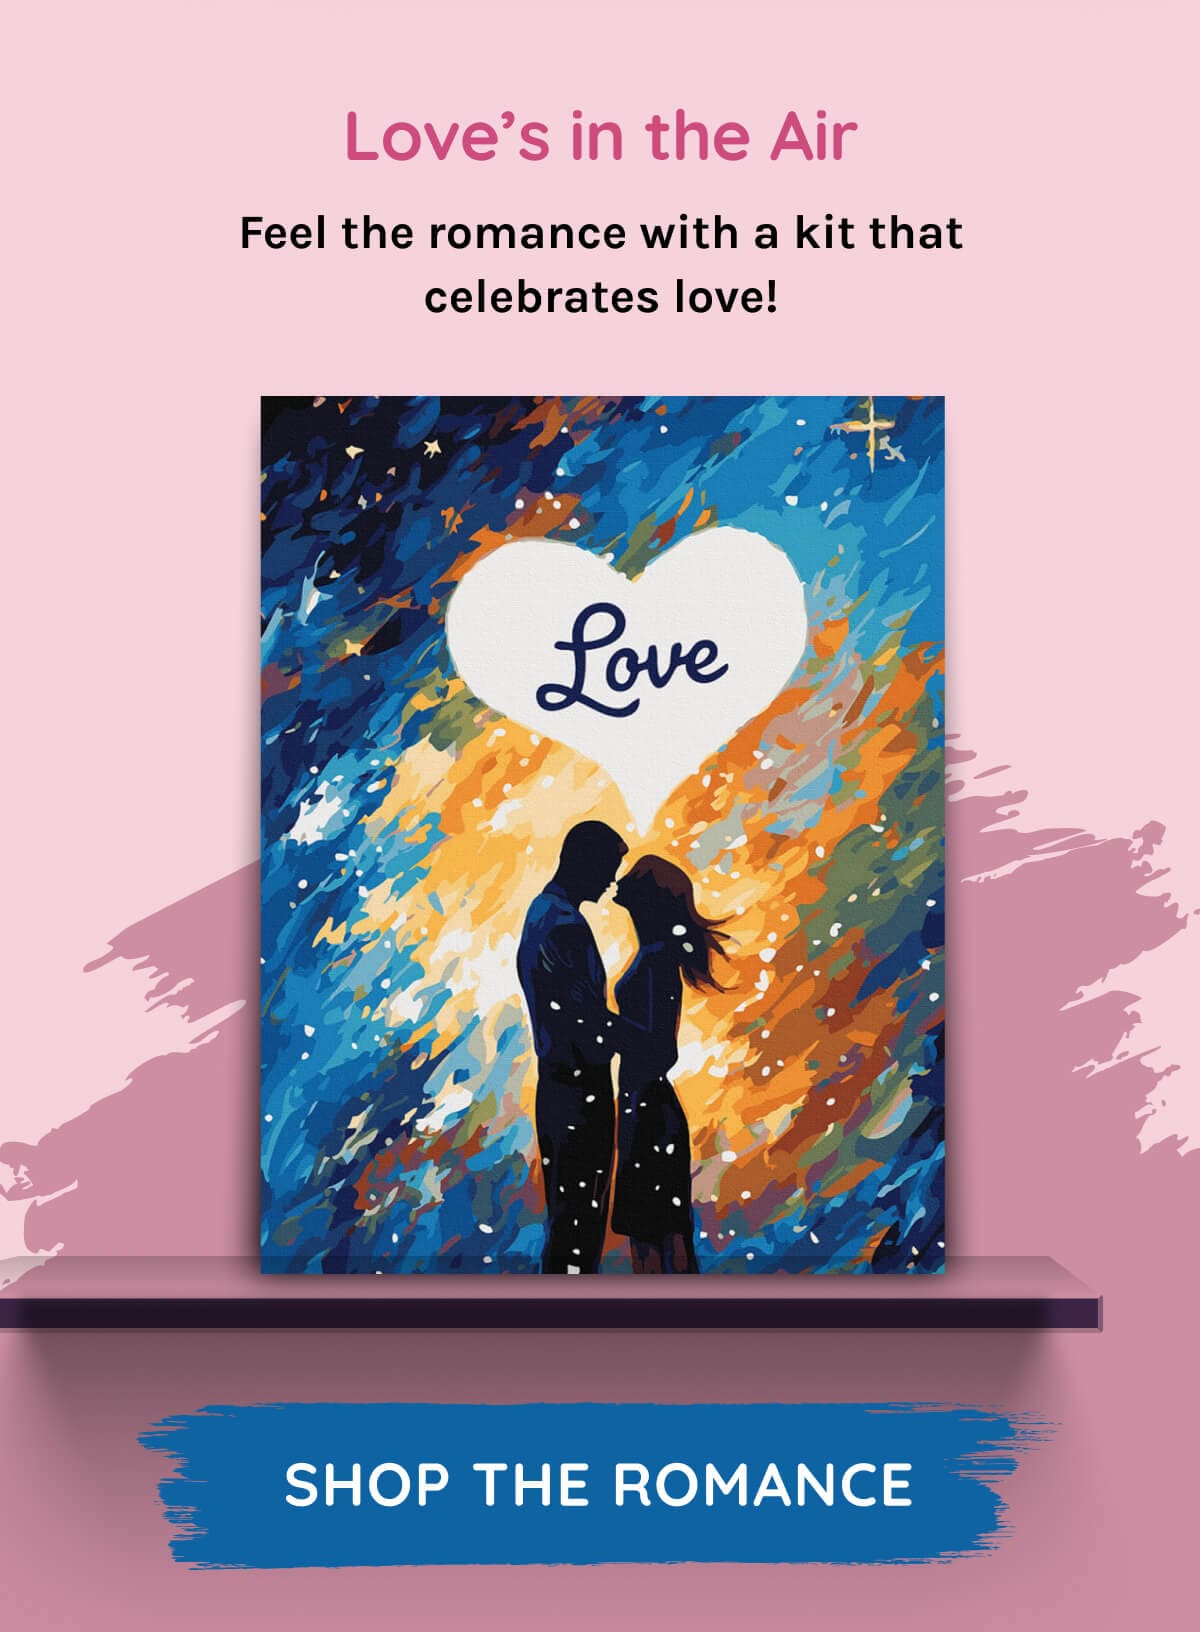 Loves in the Air Feel the romance with a kit that celebrates love!